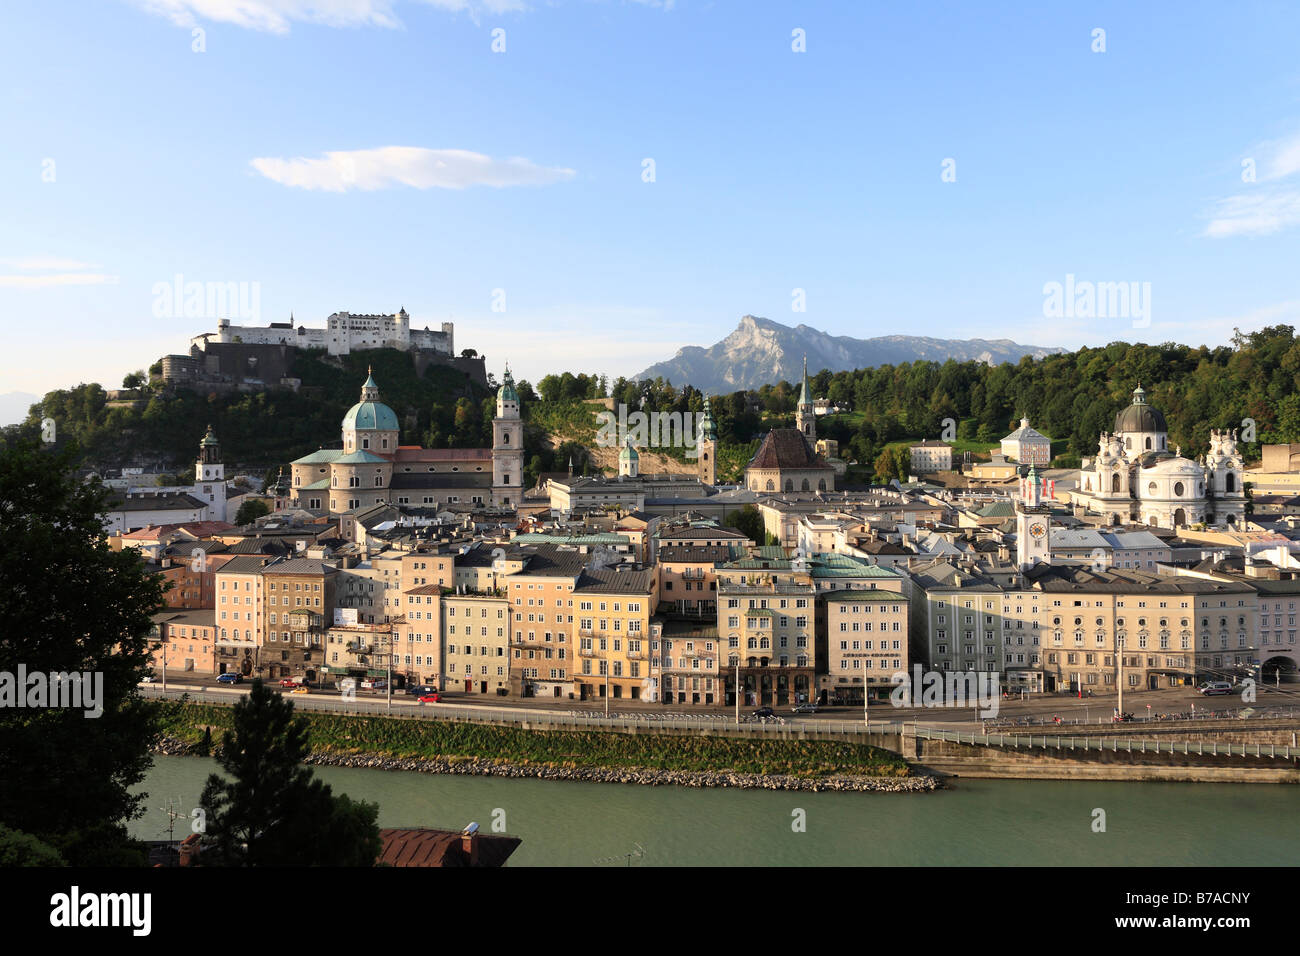 View from Kapuzinerberg Hill of the historic district of Salzburg with Festung Hohensalzburg Fortress, cathedral, Kollegienkirc Stock Photo